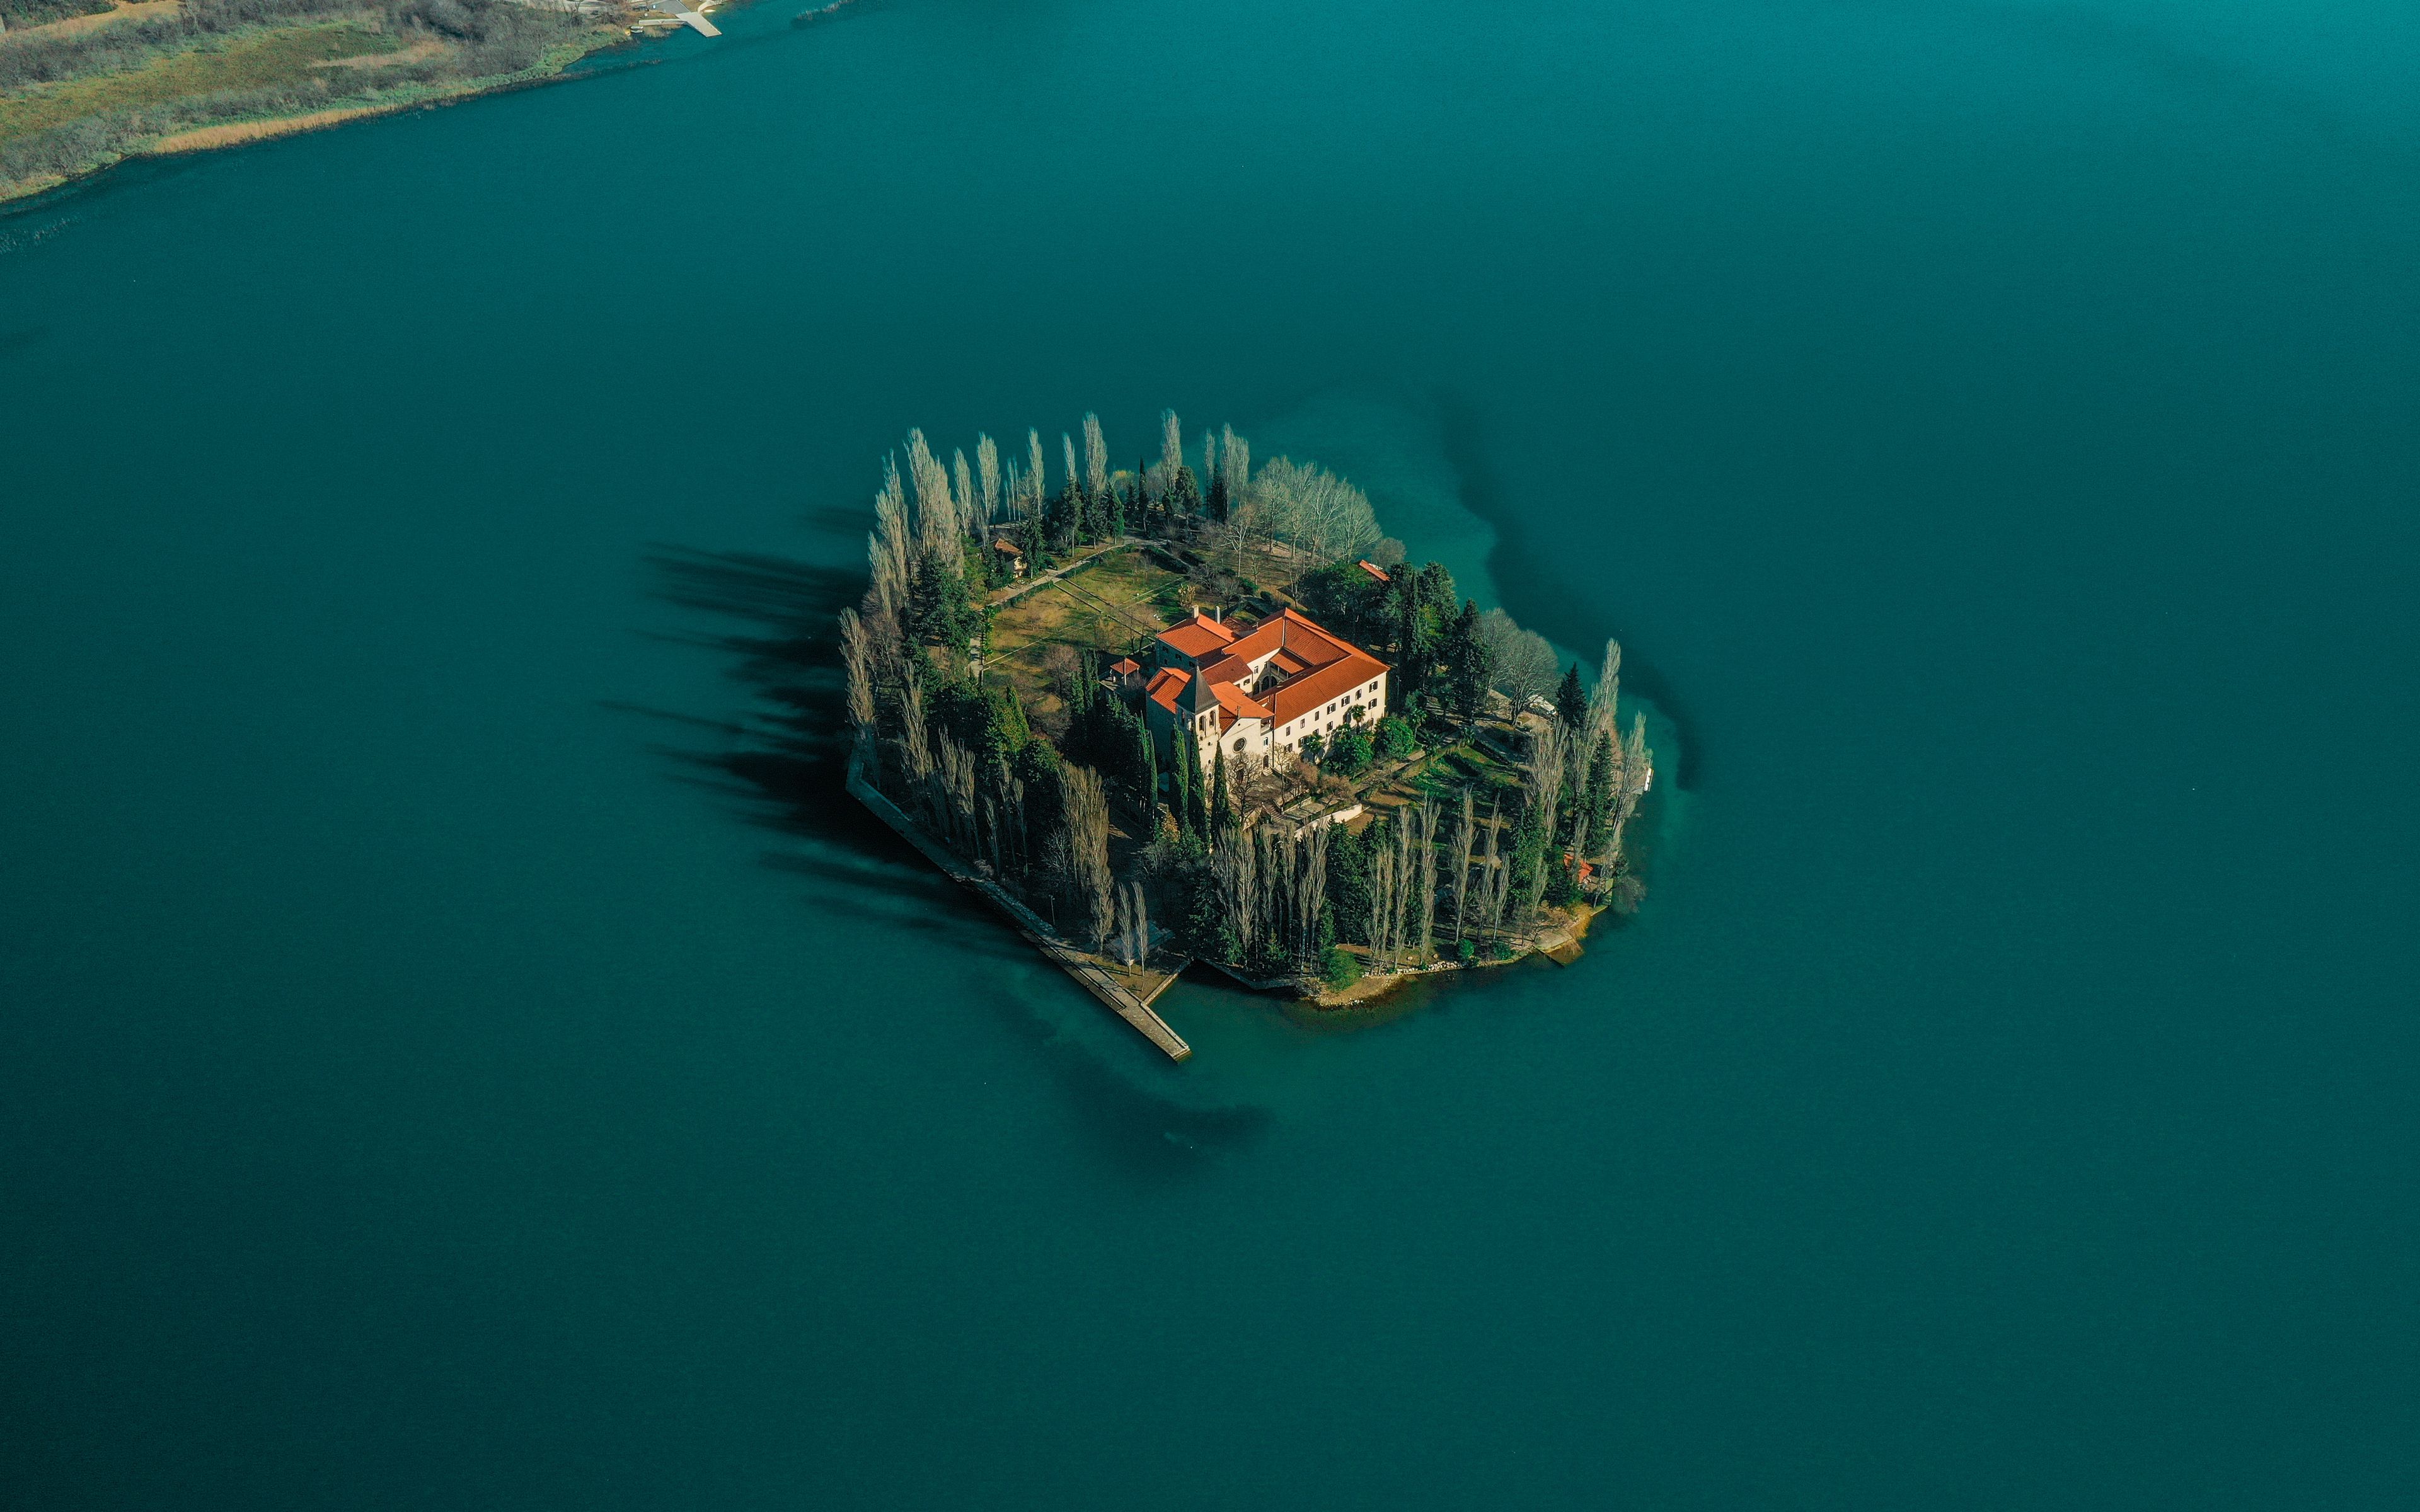 Download wallpaper 3840x2400 lake, island, aerial view, trees, house 4k ...